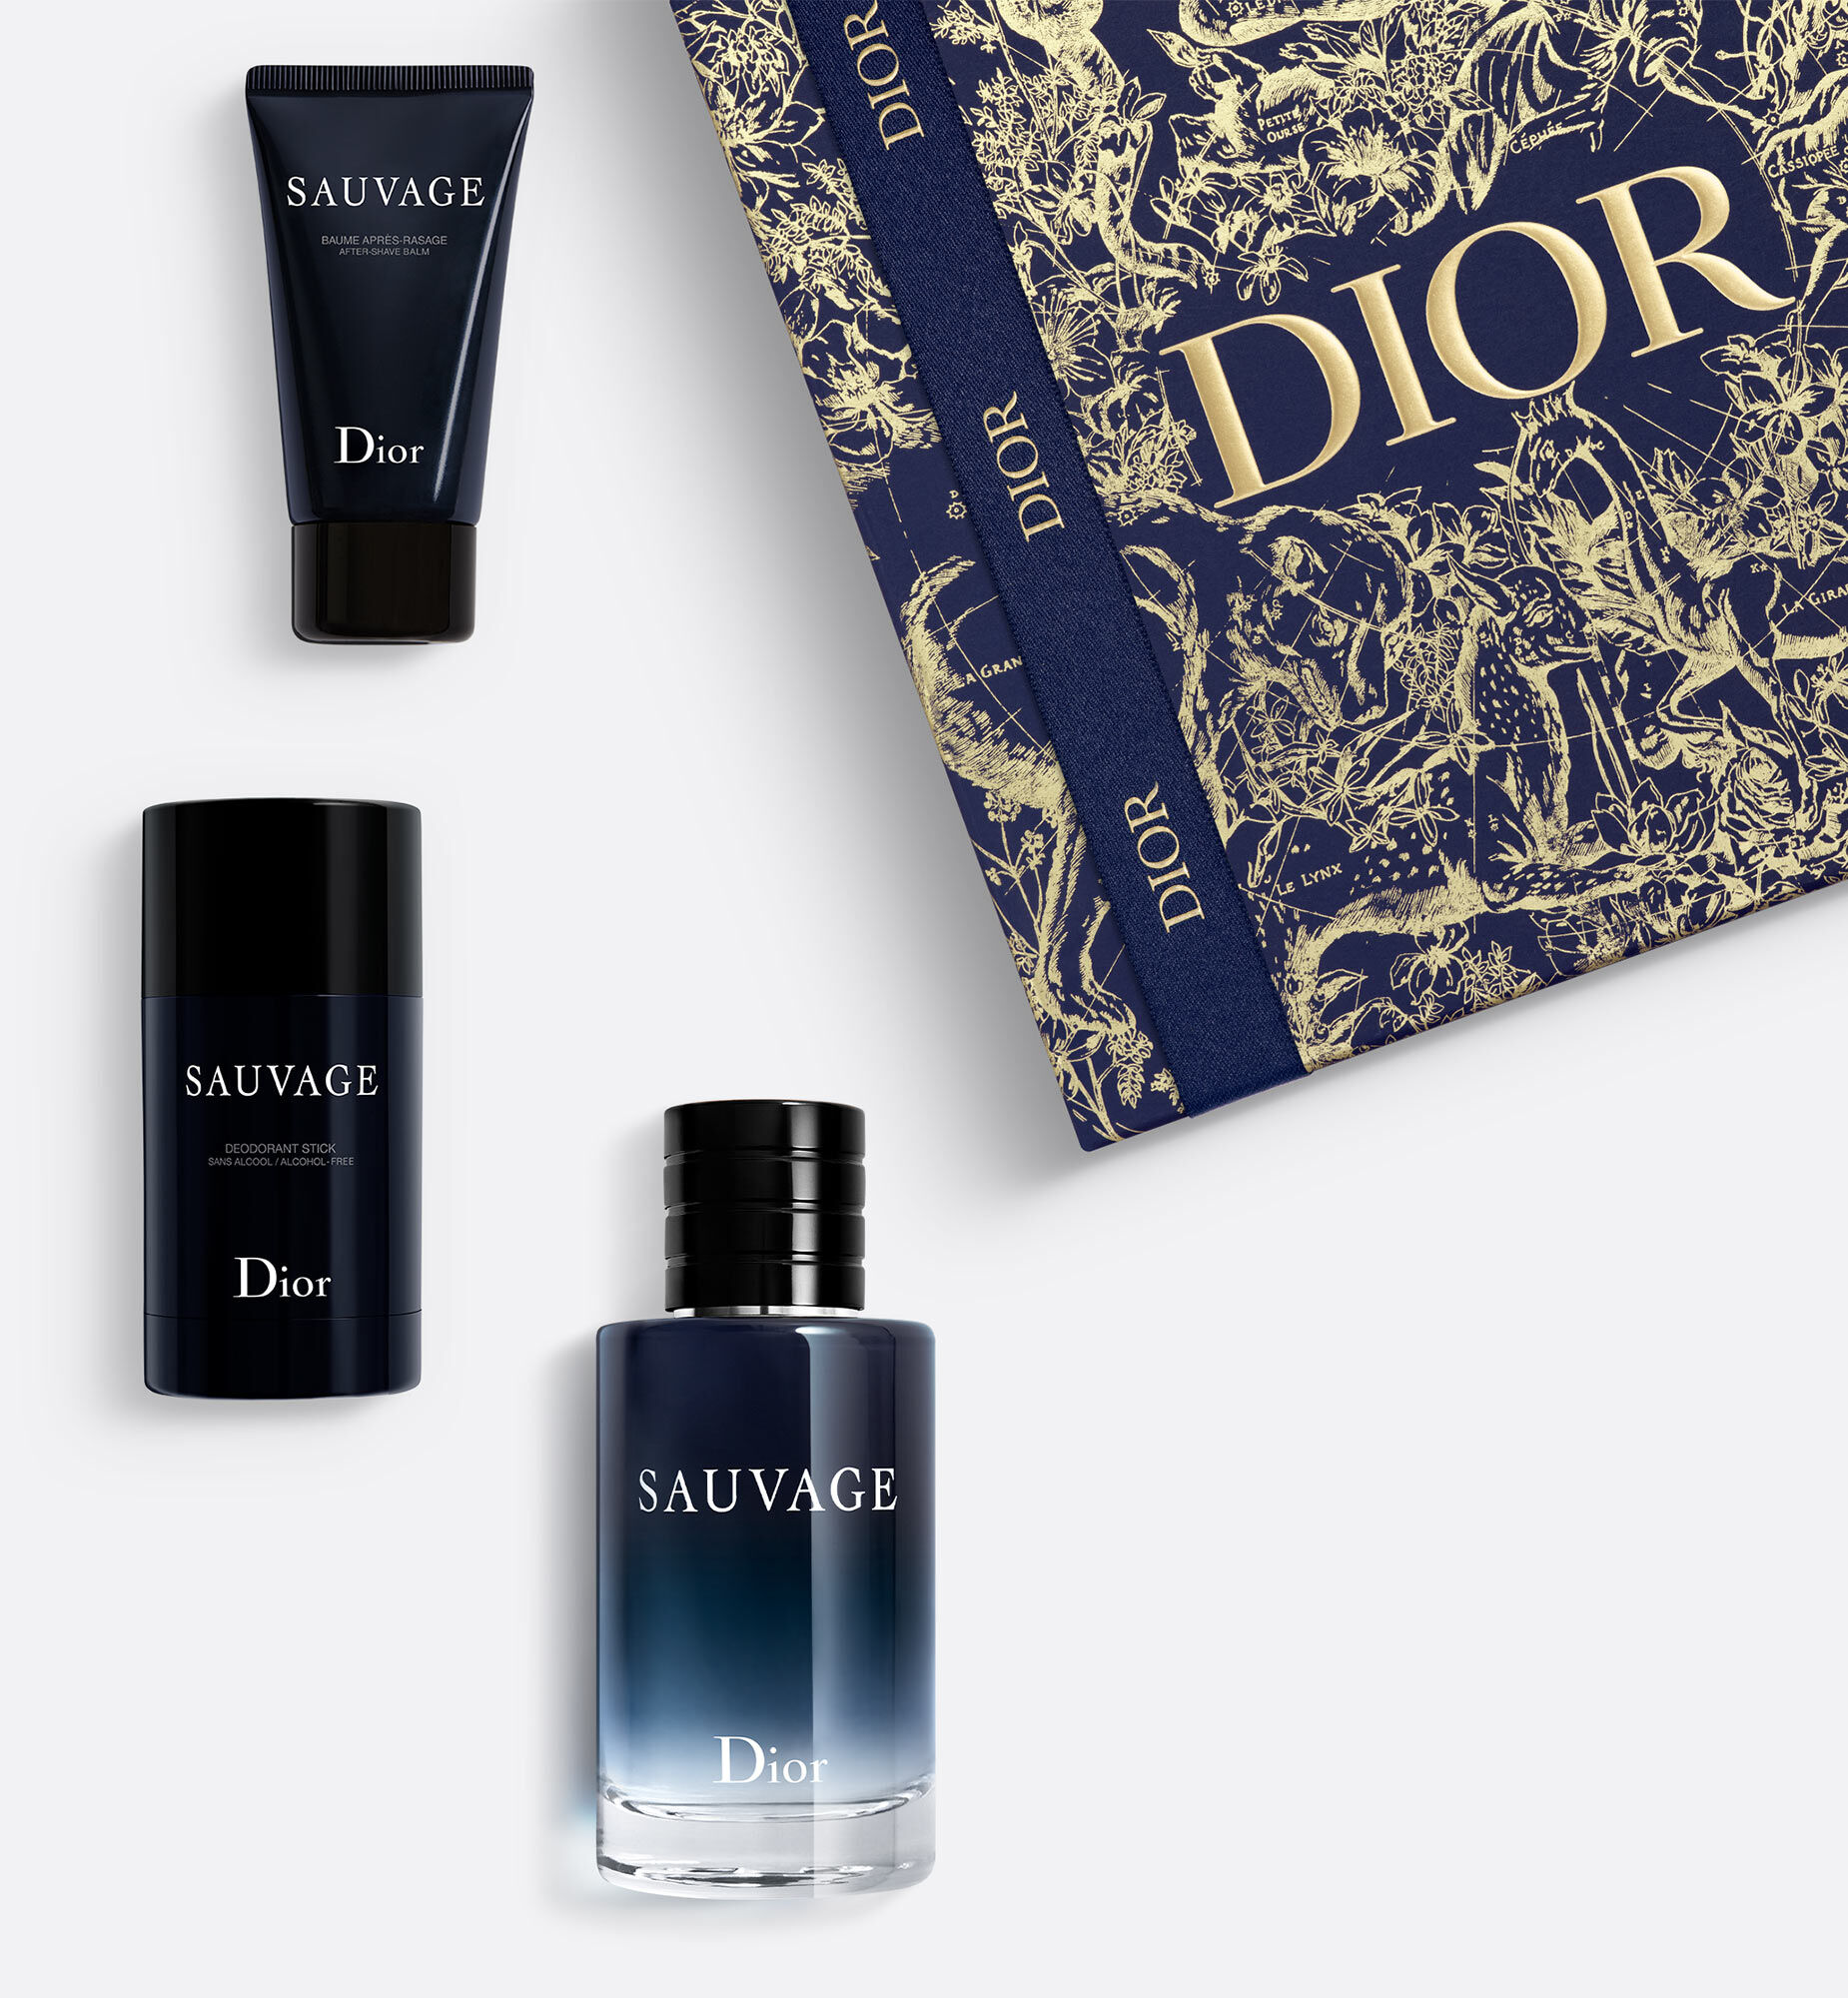 Top 10 Dior Fragrances for Men  2020 best of CD perfumes  French Luxury  Blog